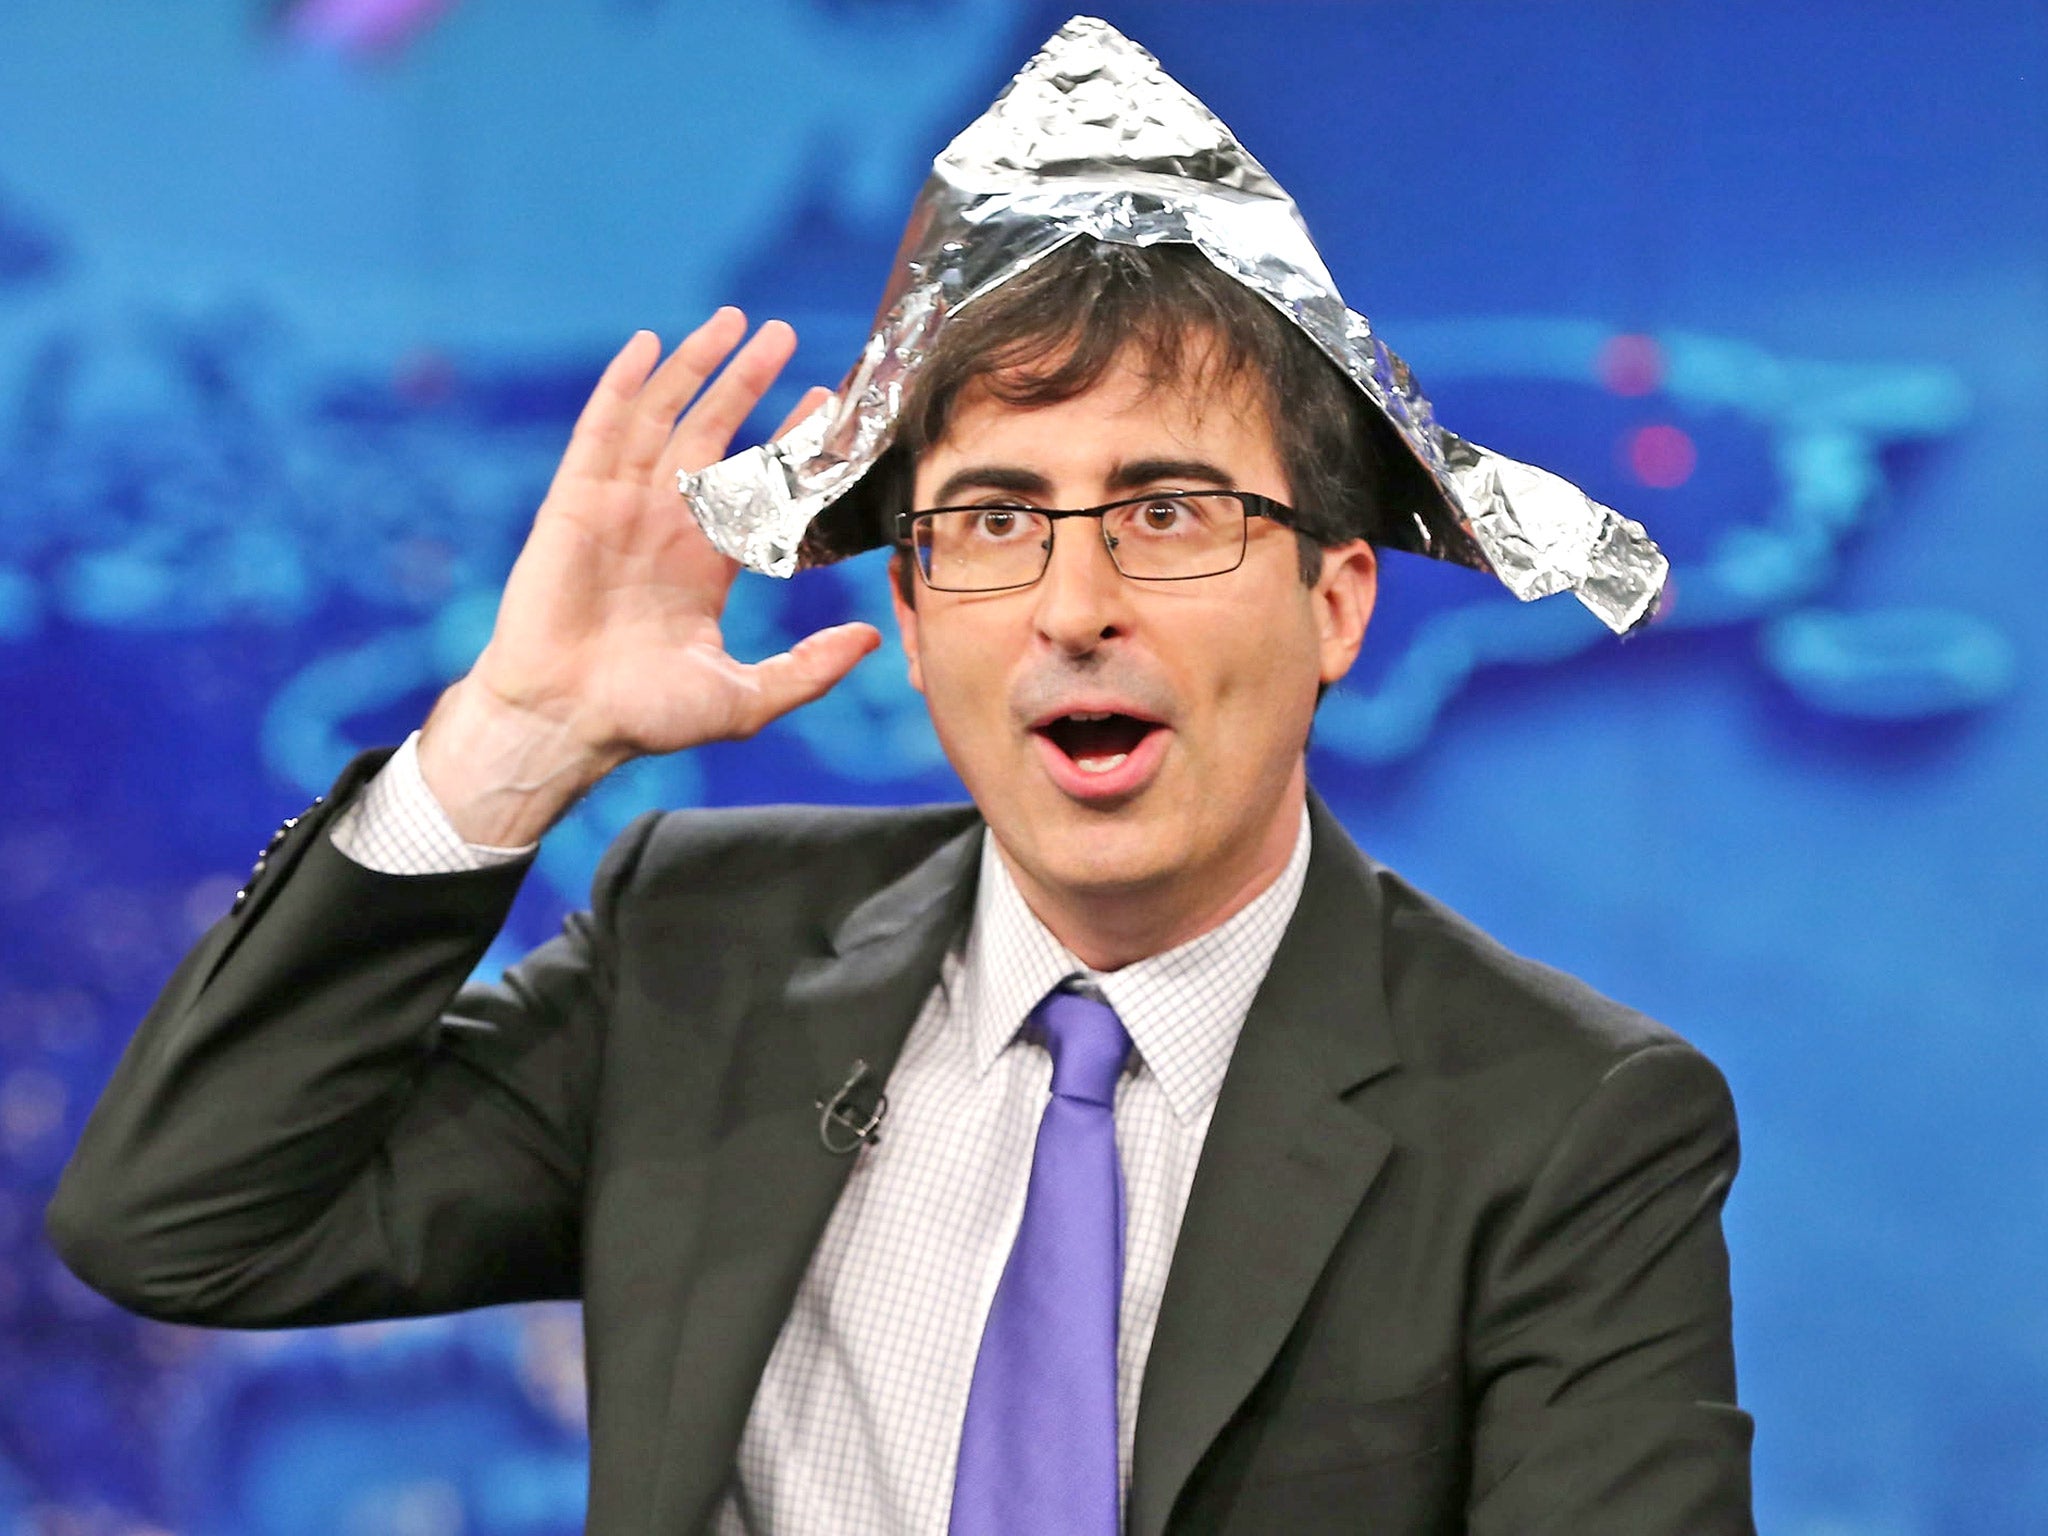 British comedian John Oliver had plenty of material to draw upon for his first week as guest host of the popular satiric news programme in the United States